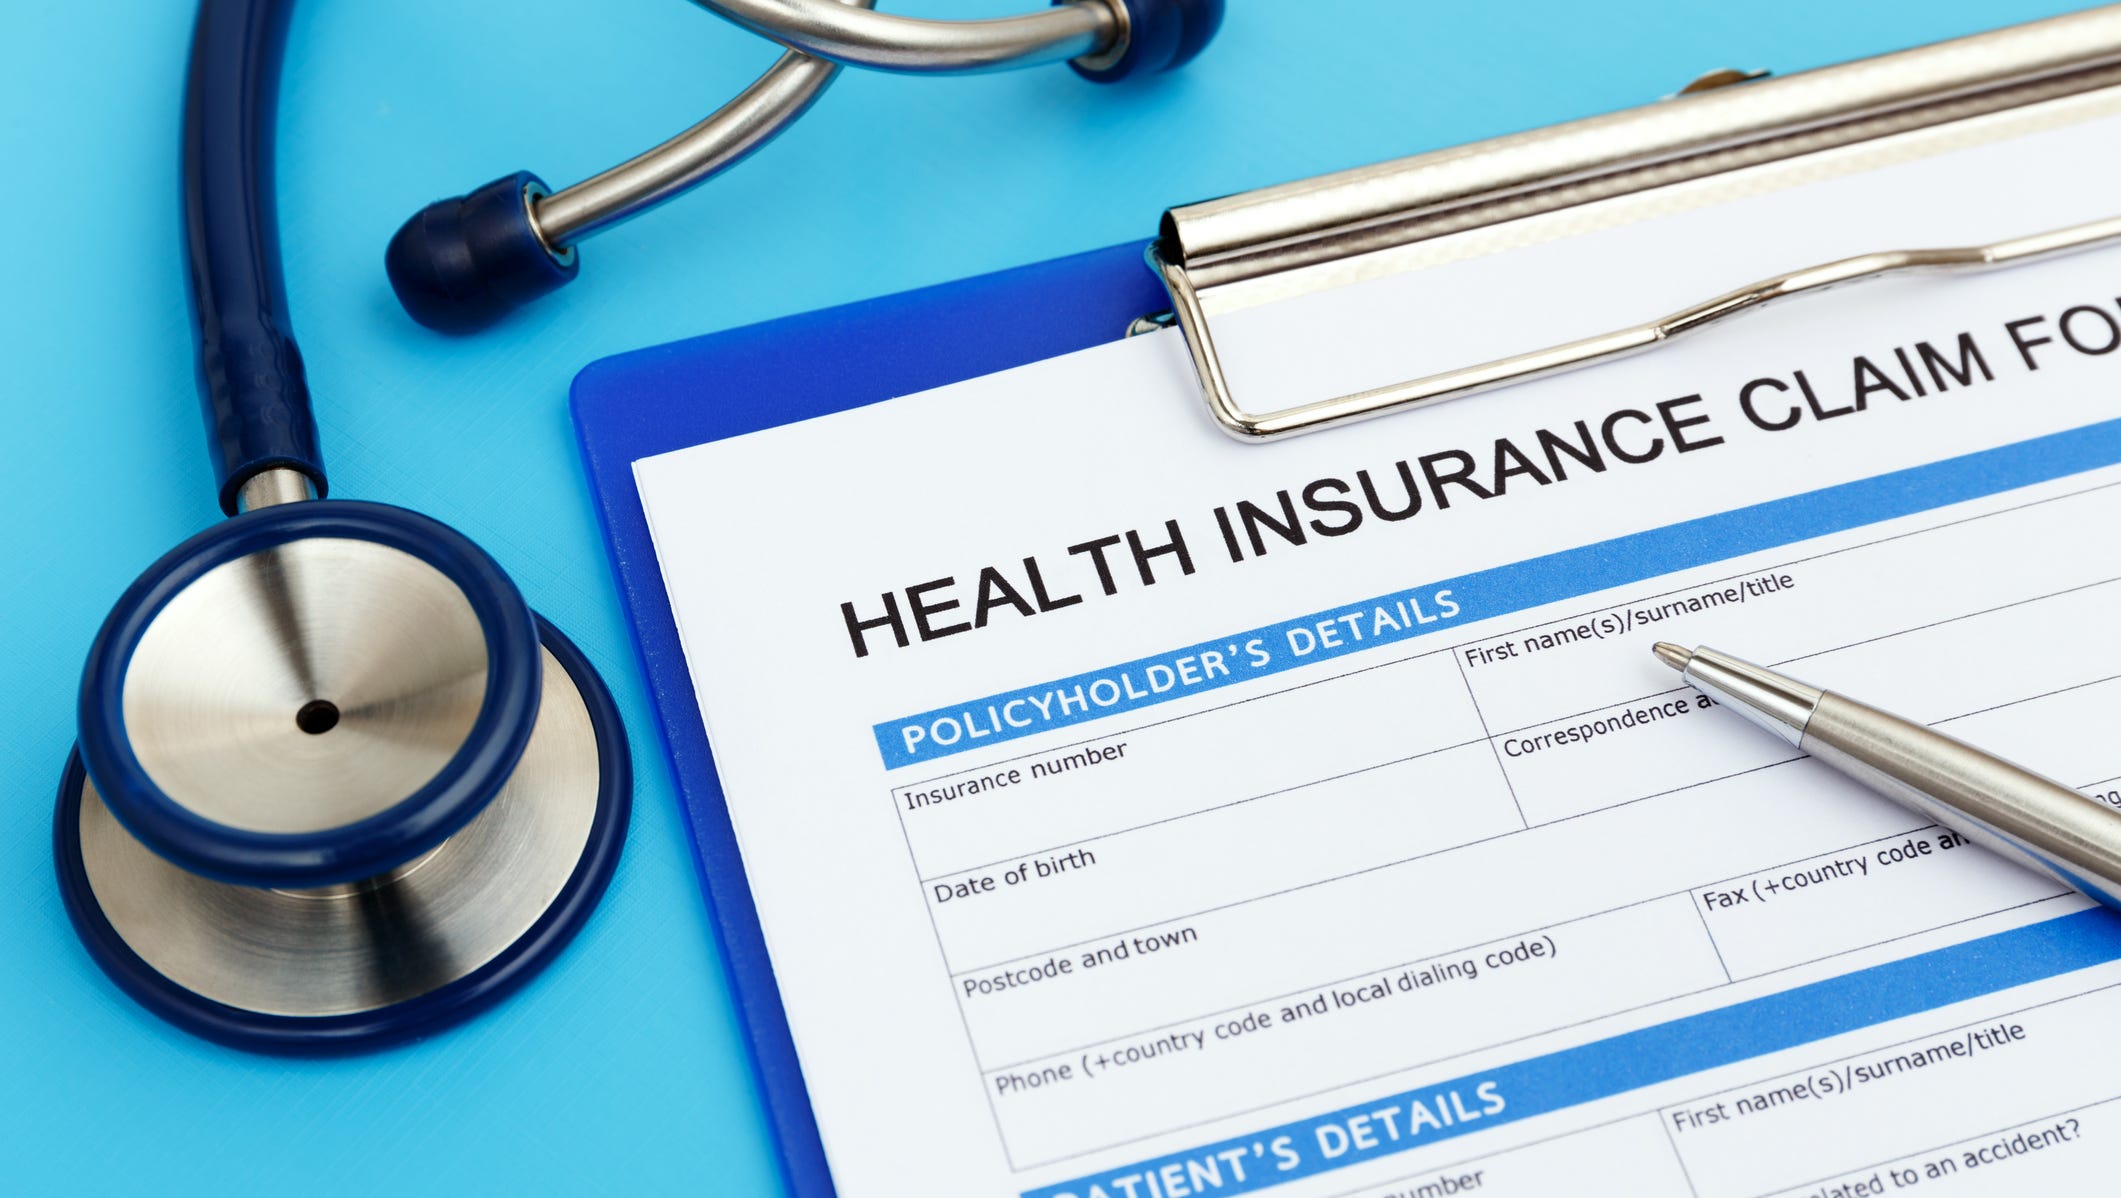 AIM will help people enroll for health insurance